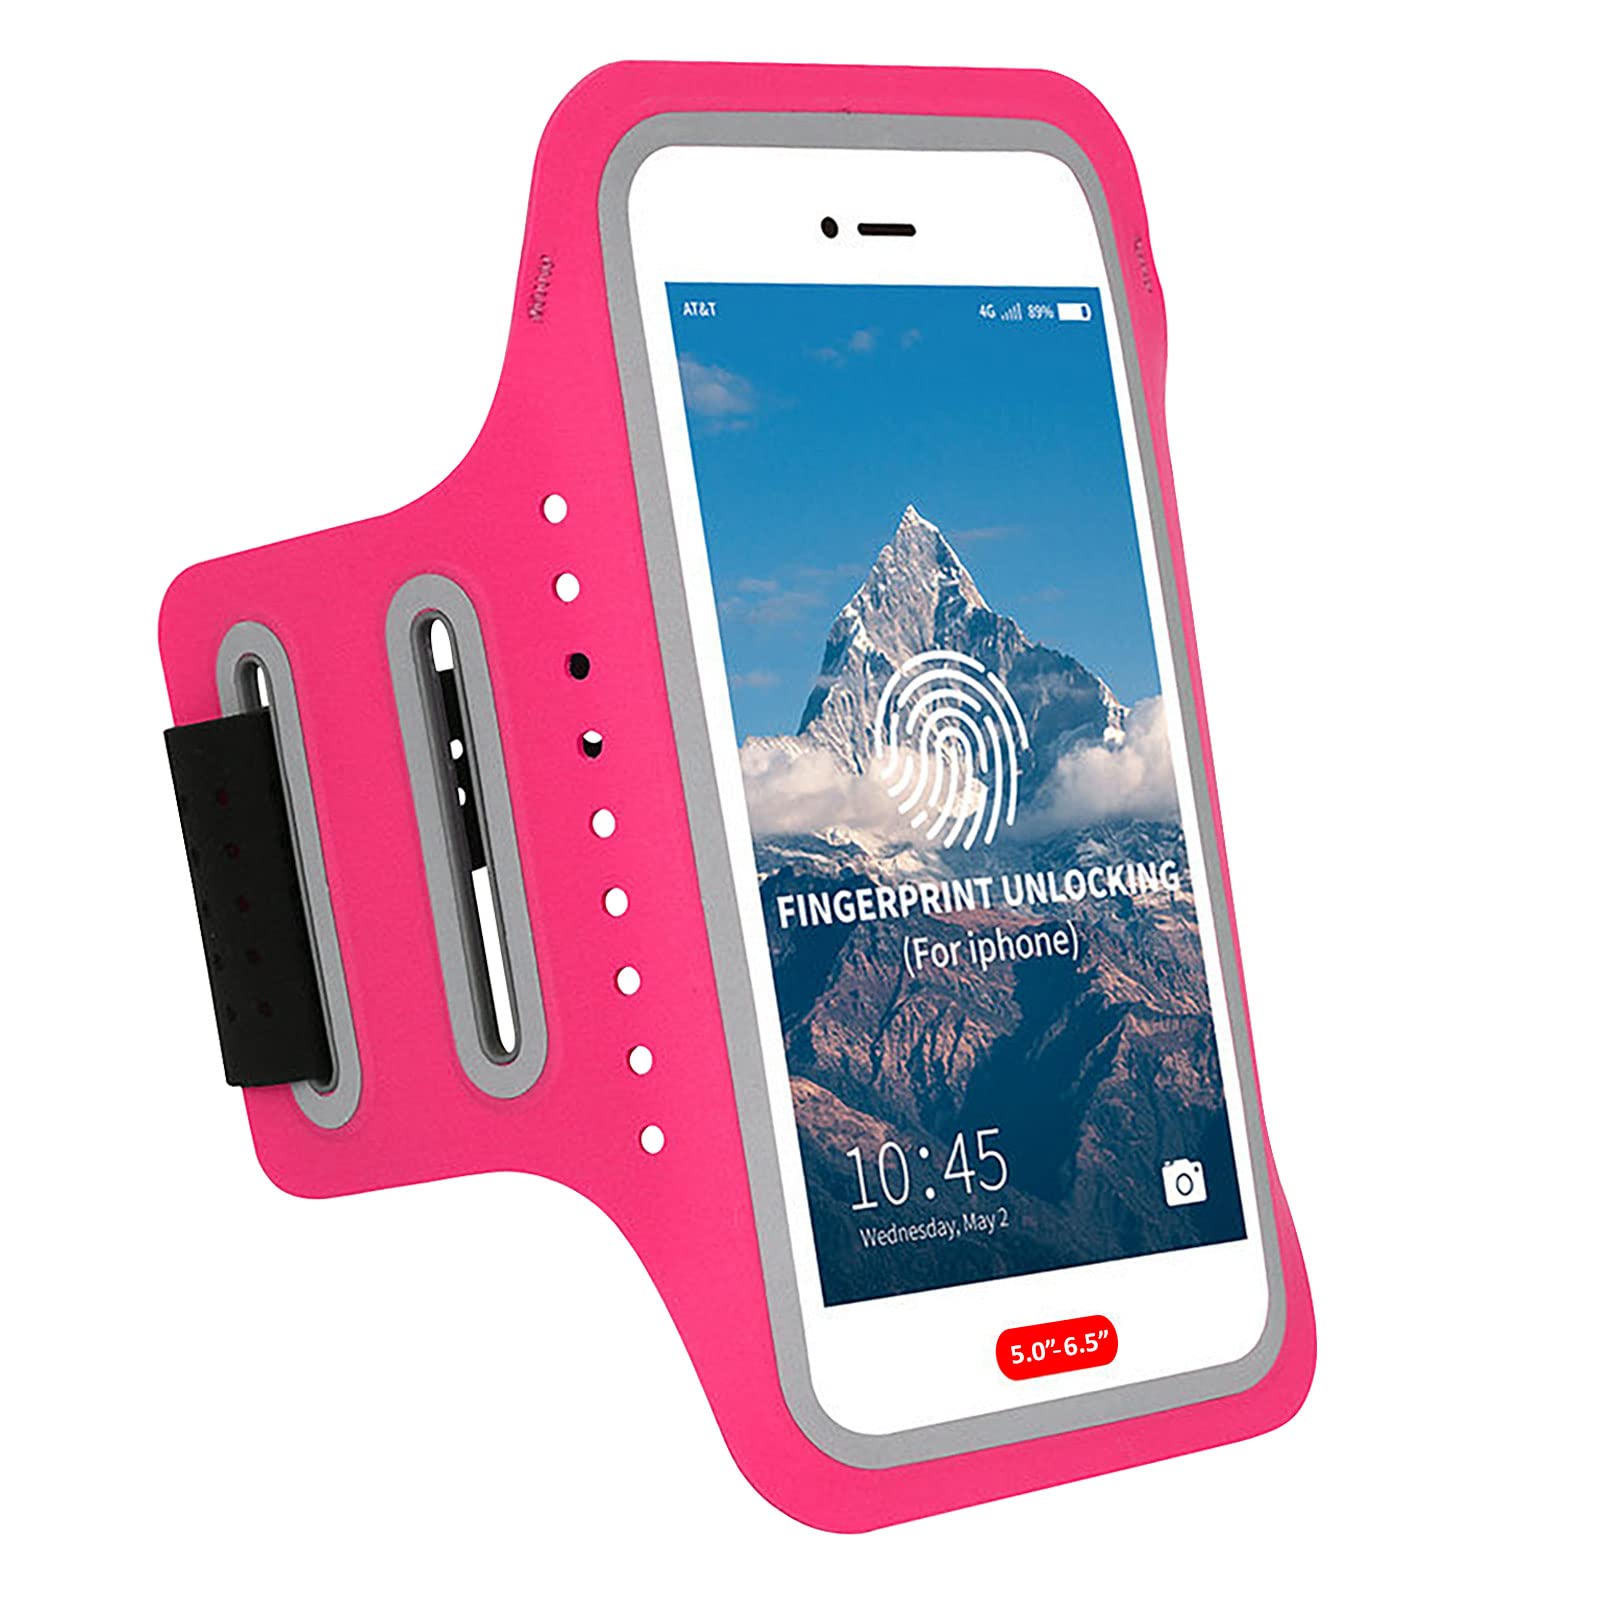 MOVOYEE Phone Holder for Running Women Kids,Armband Cell Phone Holder iPhone 11 12 13 14 15 Pro Max Xs Xr X 10 8 7 6 Plus SE Mini Samsung Galaxy,Run Exercise Sports Gym Workout Arm Bands Wrist Pouch